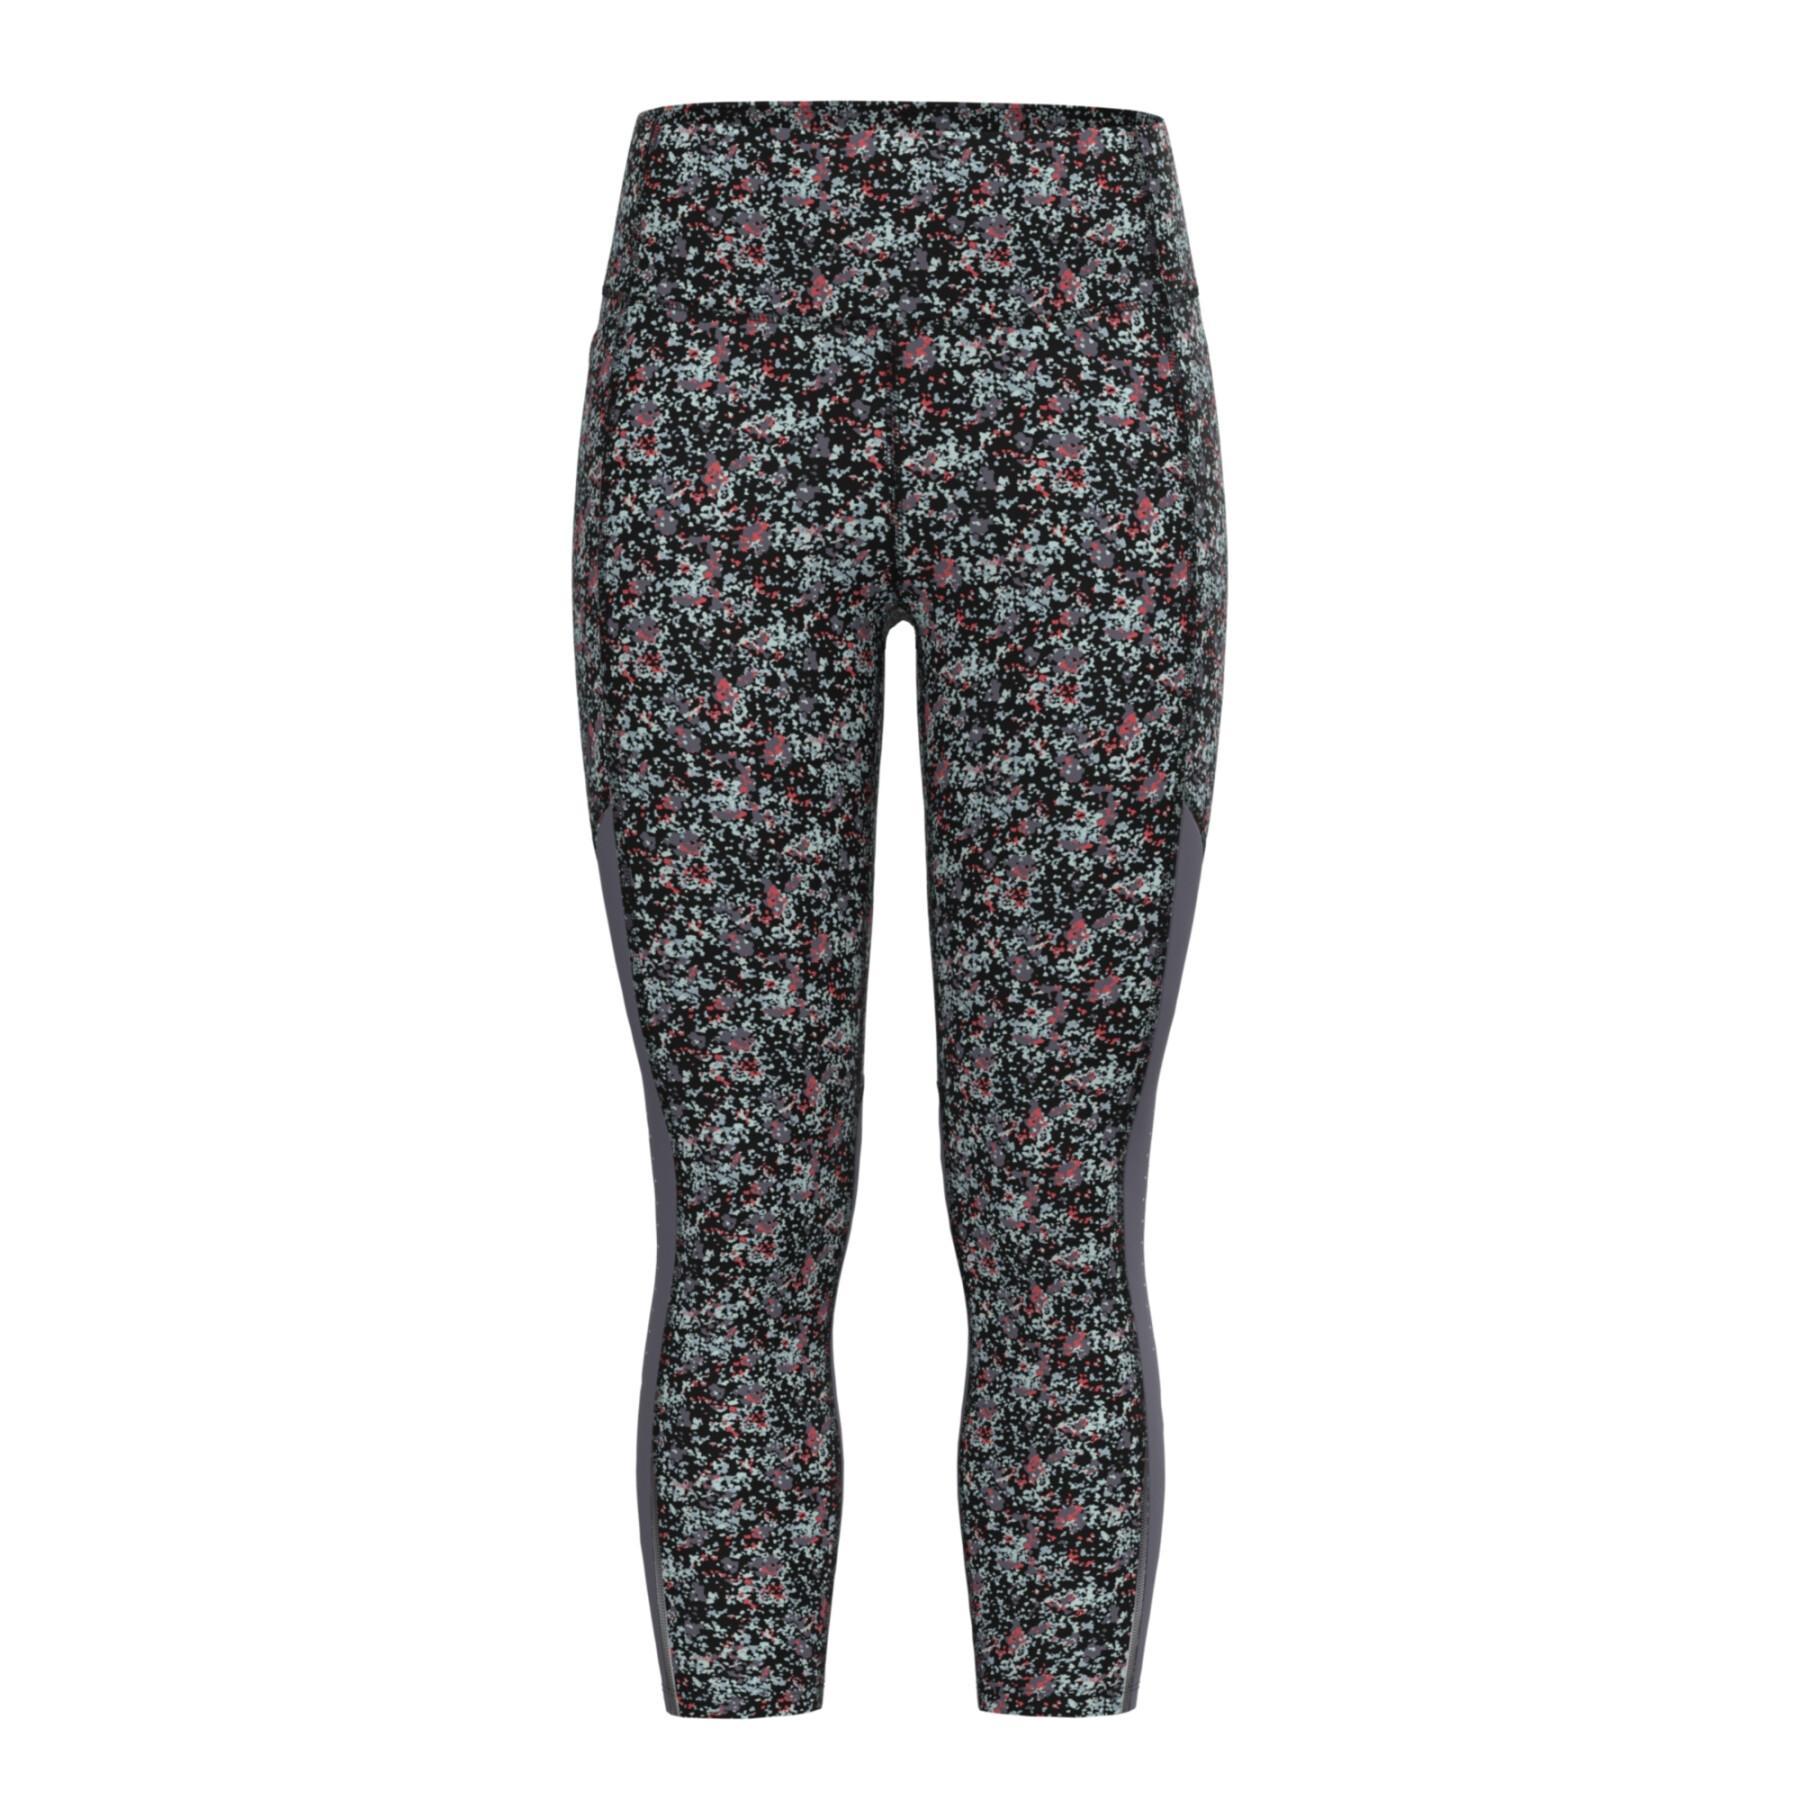 Legging femme Under Armour Fly Fast Ankle II